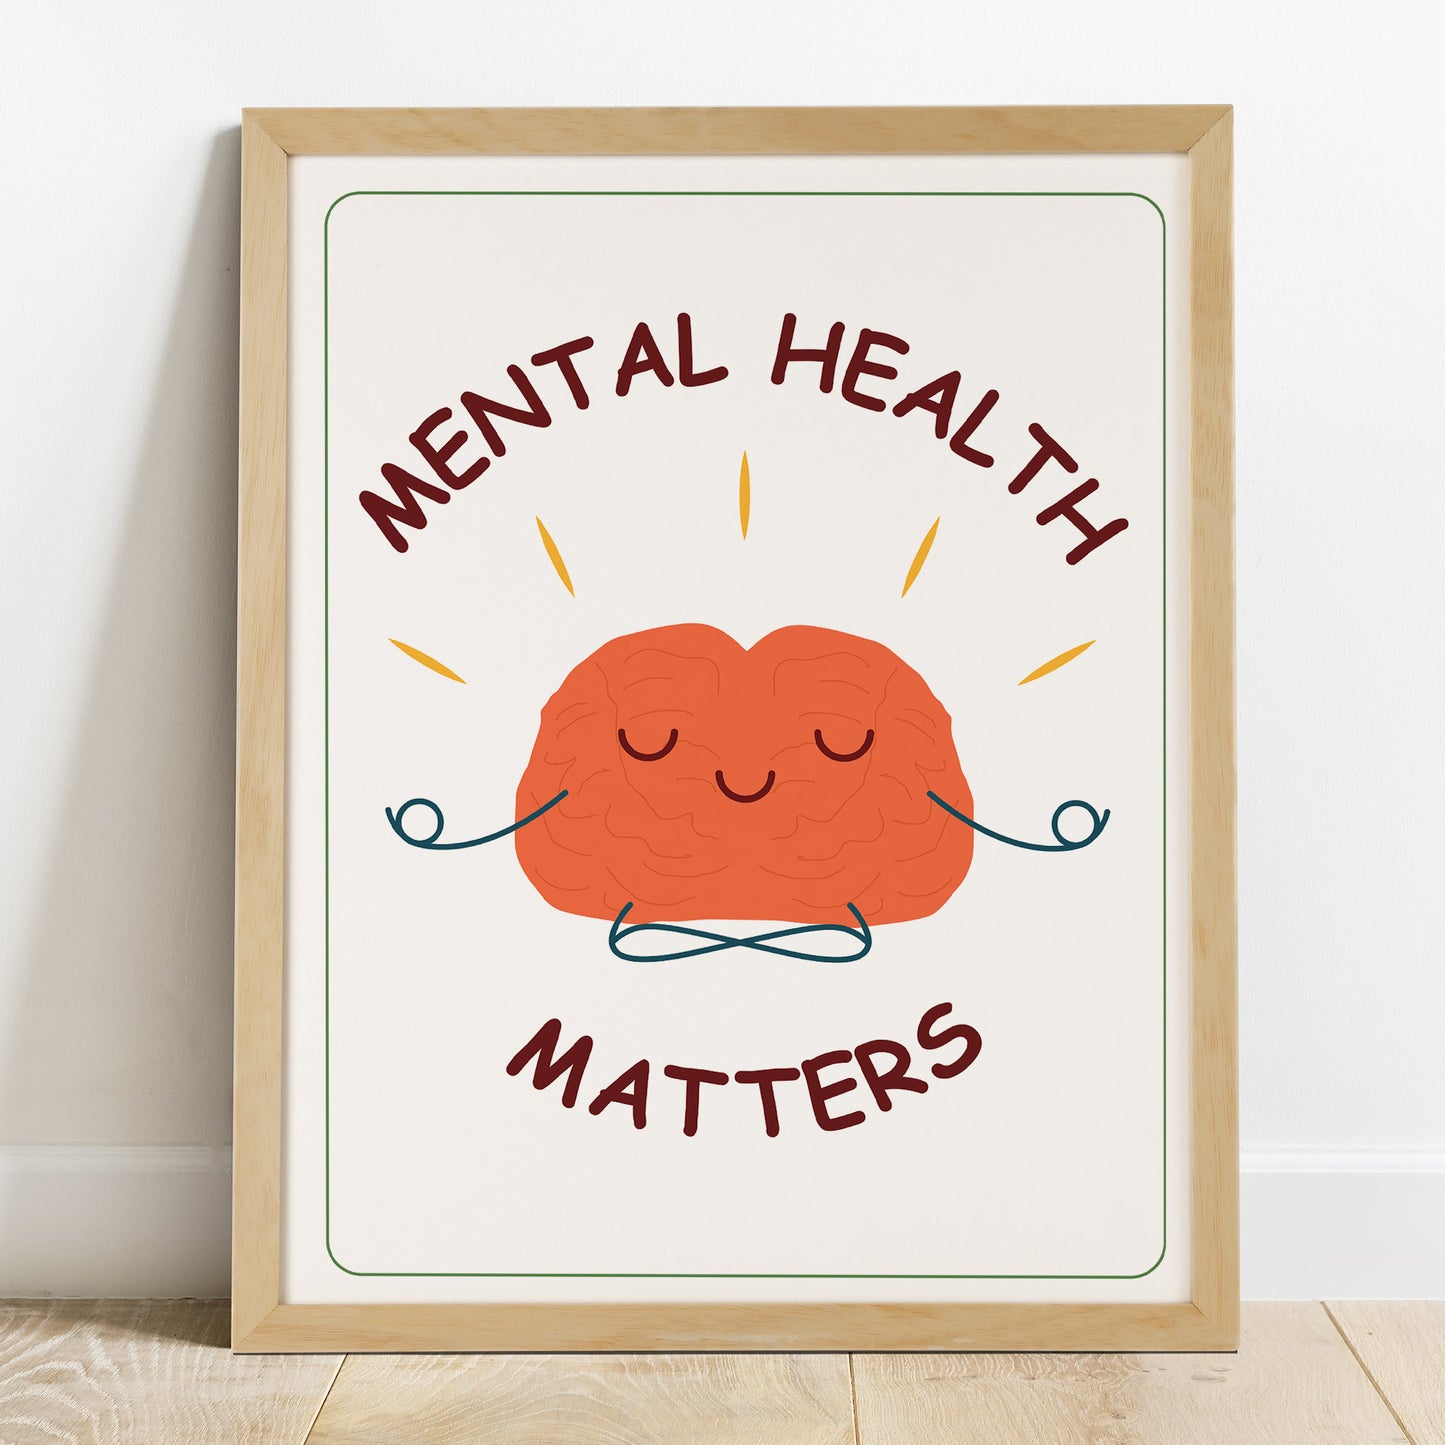 mental health matters quotes